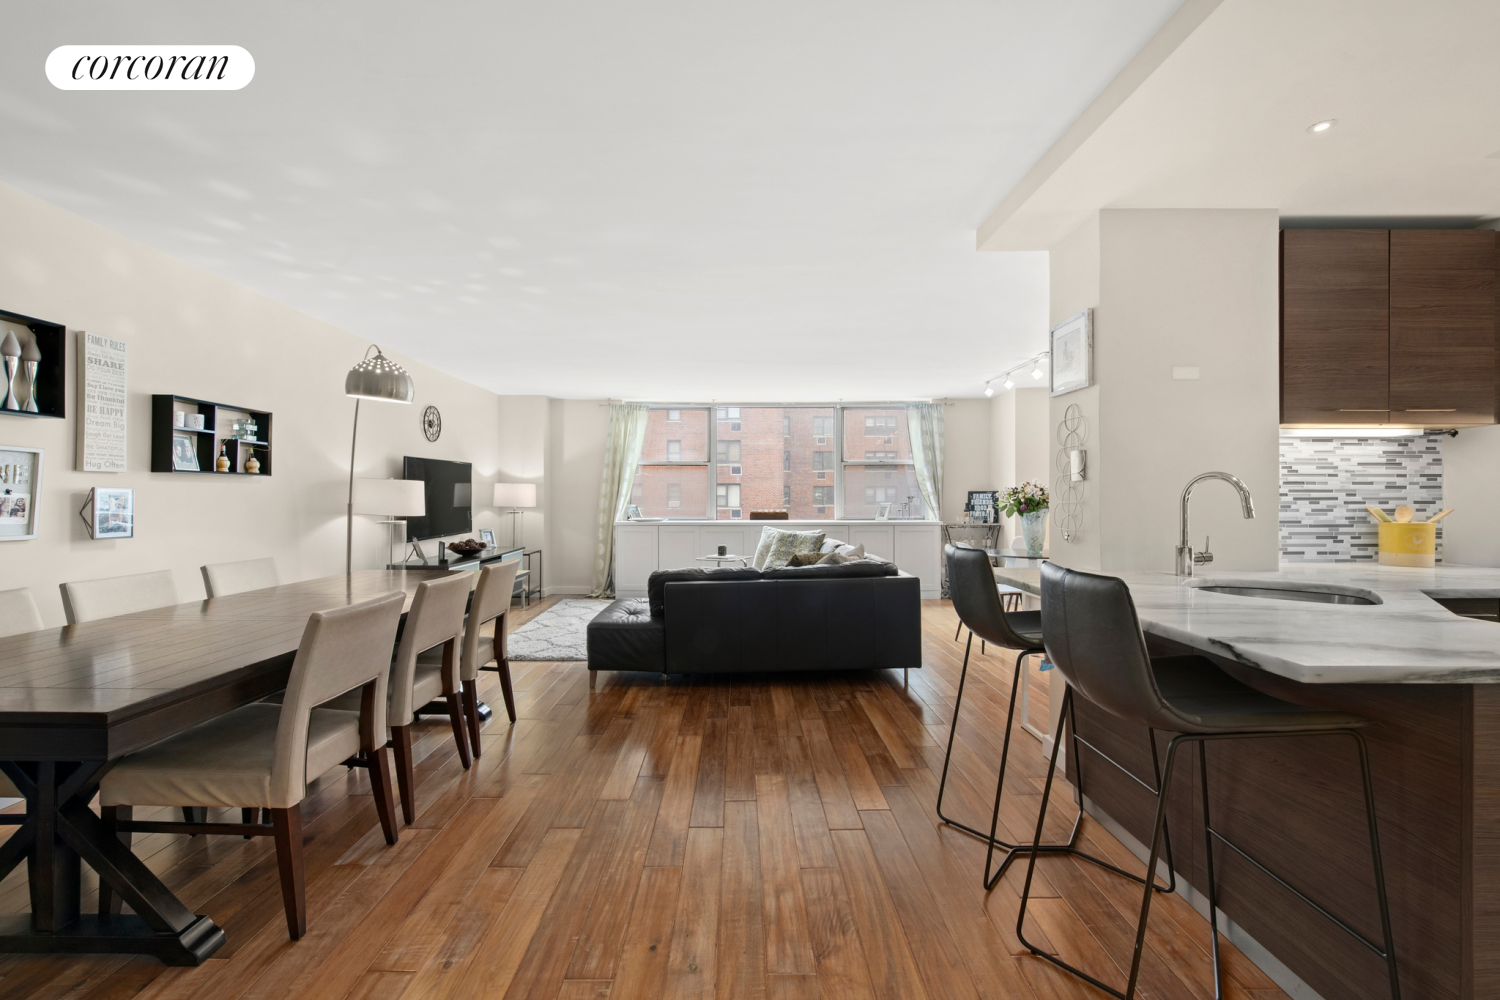 501 East 79th Street 8C, Yorkville, Upper East Side, NYC - 2 Bedrooms  
2 Bathrooms  
5 Rooms - 